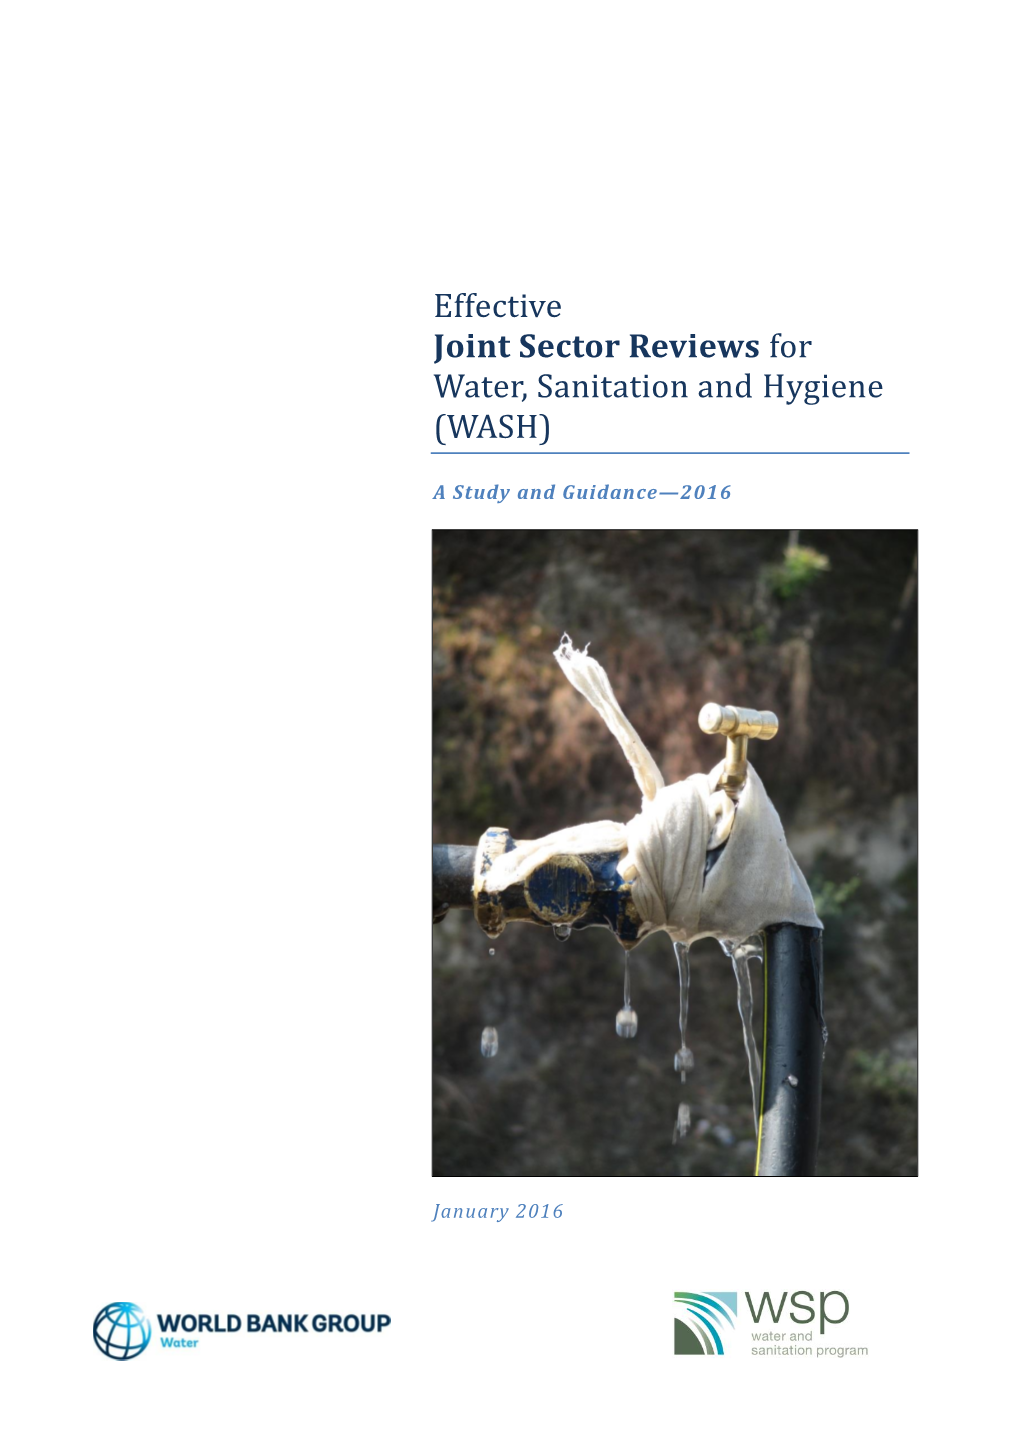 Effective Joint Sector Reviews for Water, Sanitation and Hygiene (WASH)